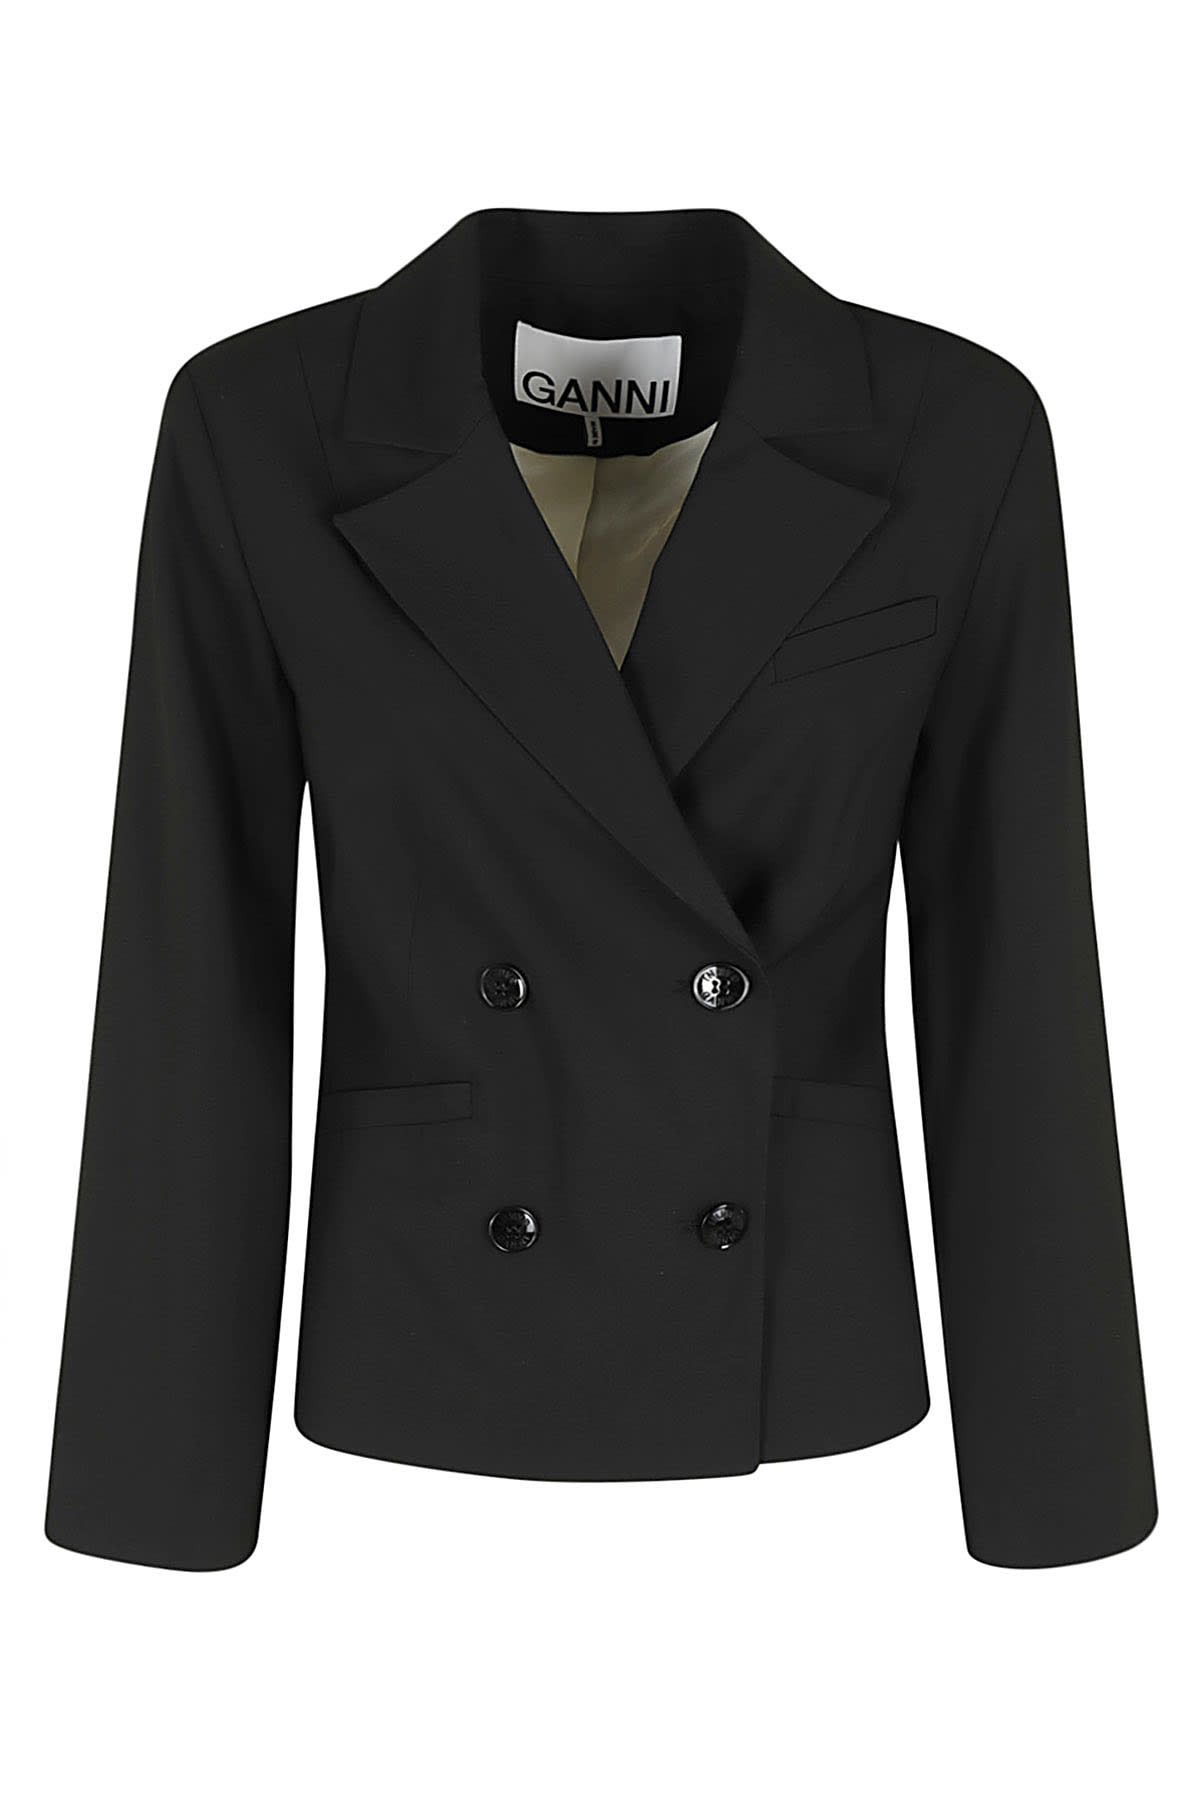 Ganni Drapey Melange Fitted Double Breasted Blazer In Black